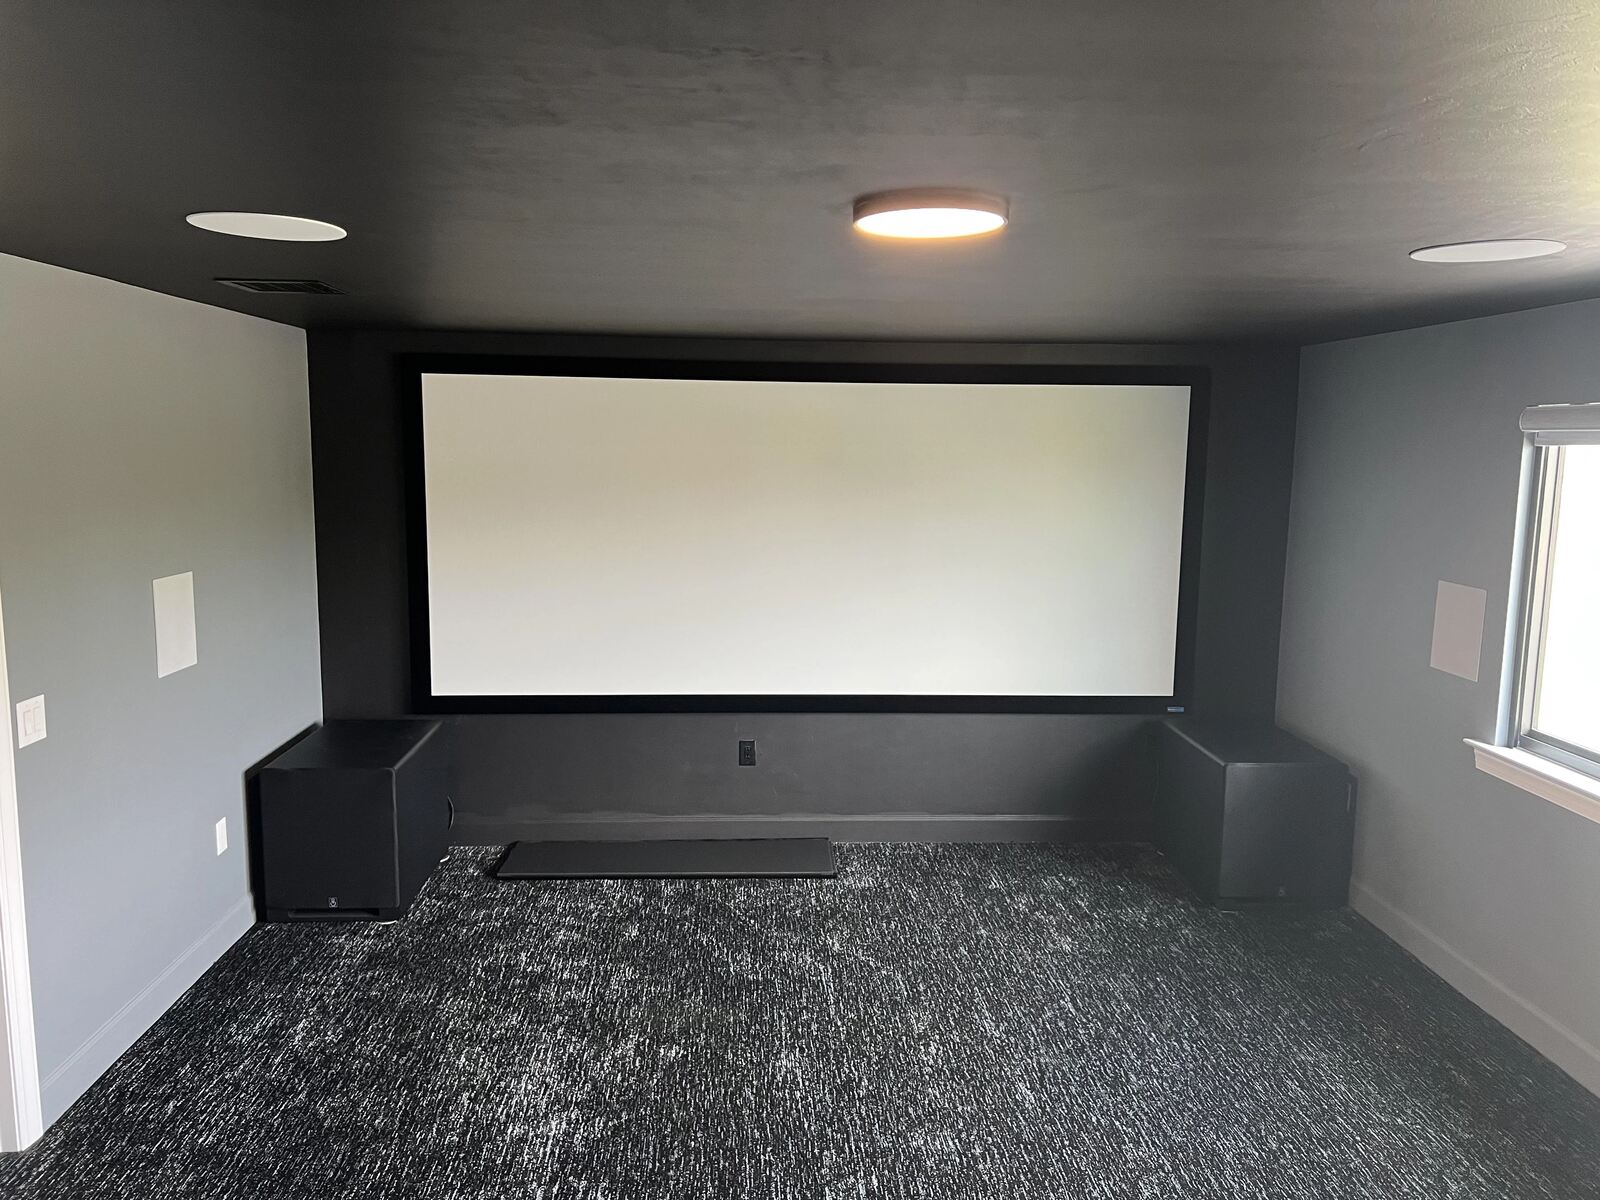 What Color Wall For Projector